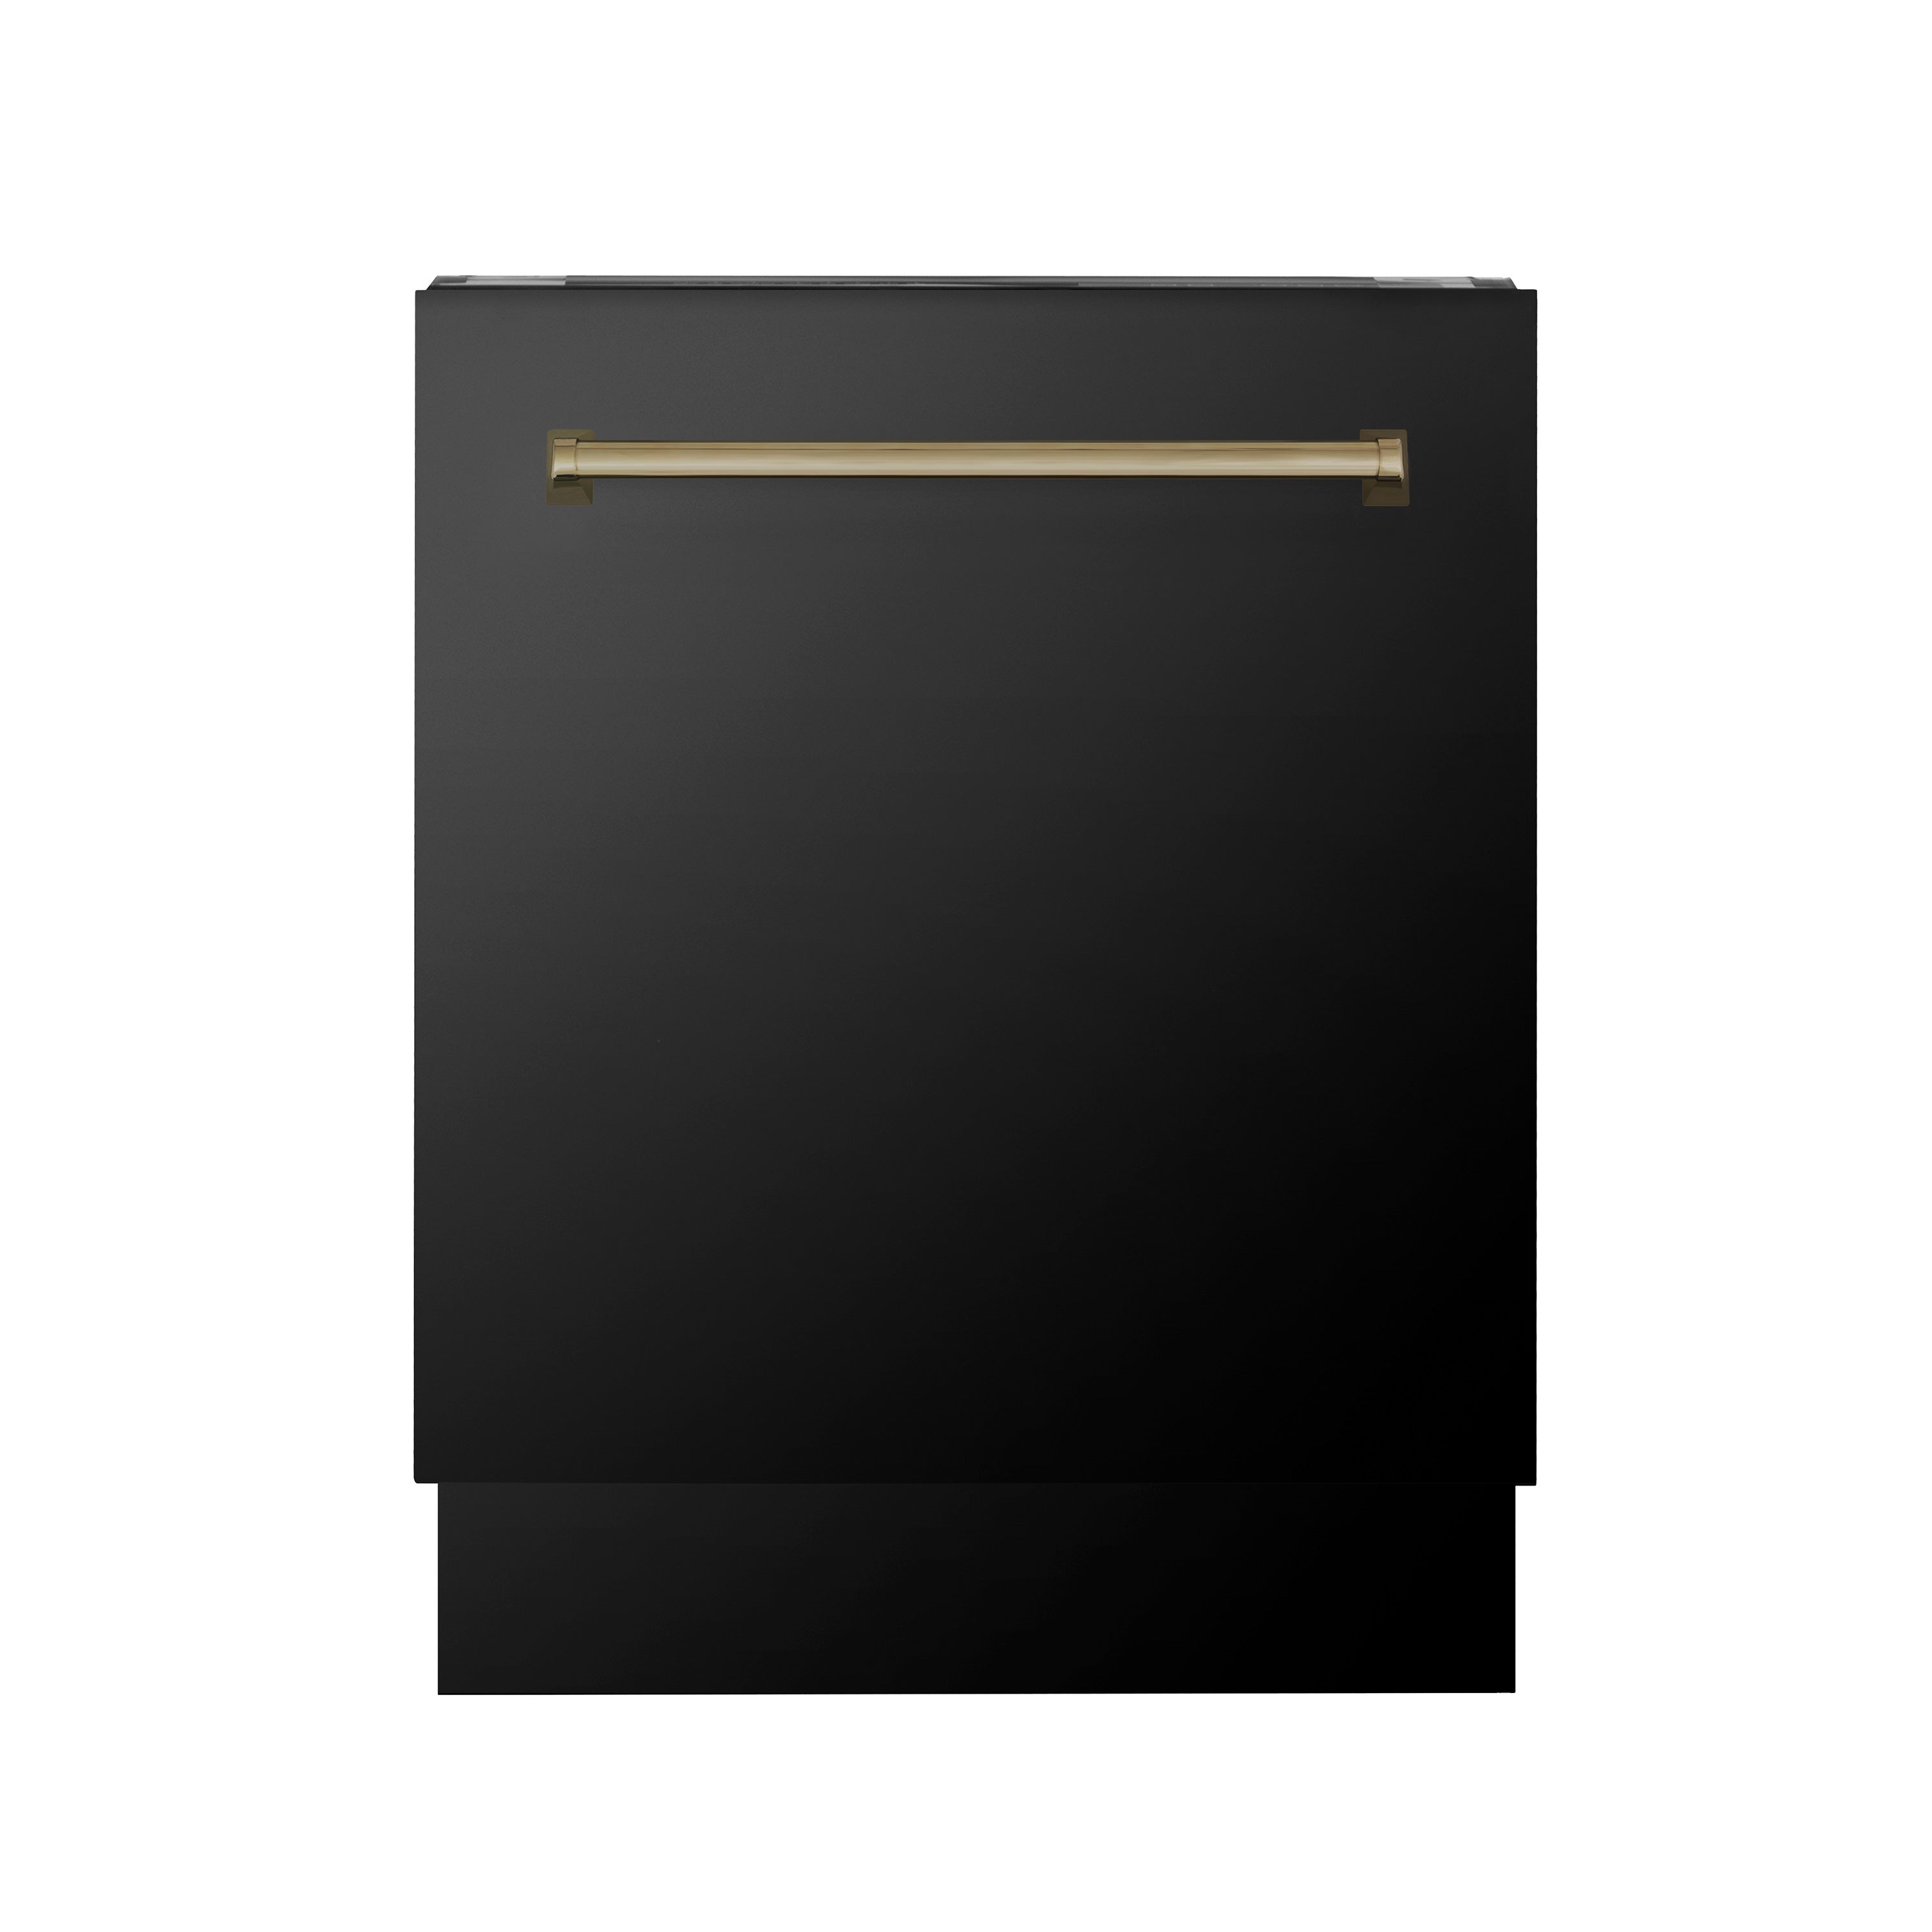 ZLINE Autograph Edition black stainless steel dishwasher with champagne bronze accents front